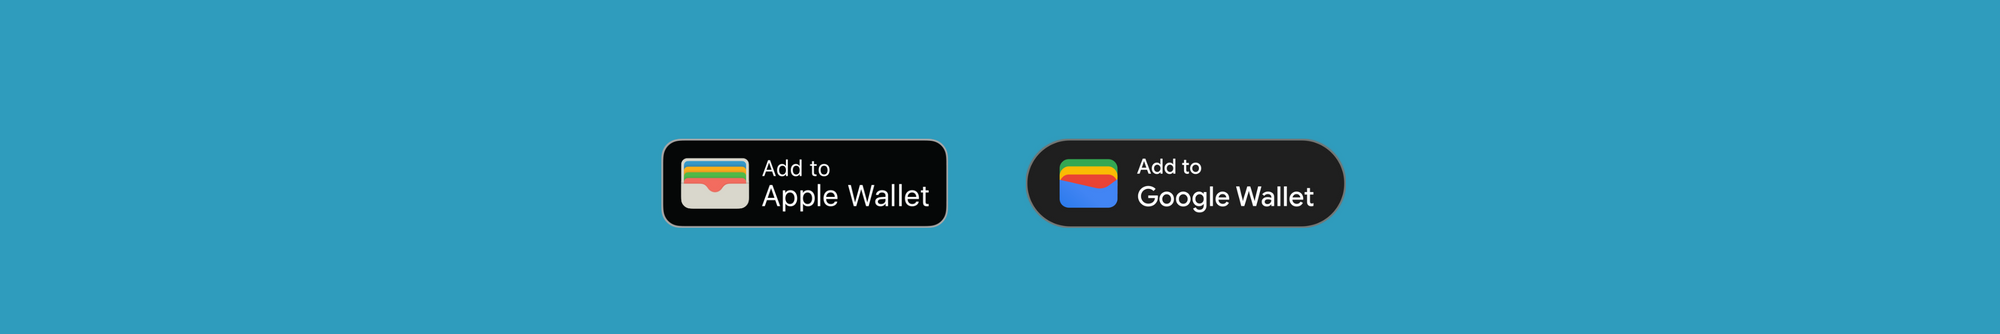 Two buttons for adding payment options to apple wallet and google wallet against a blue background.